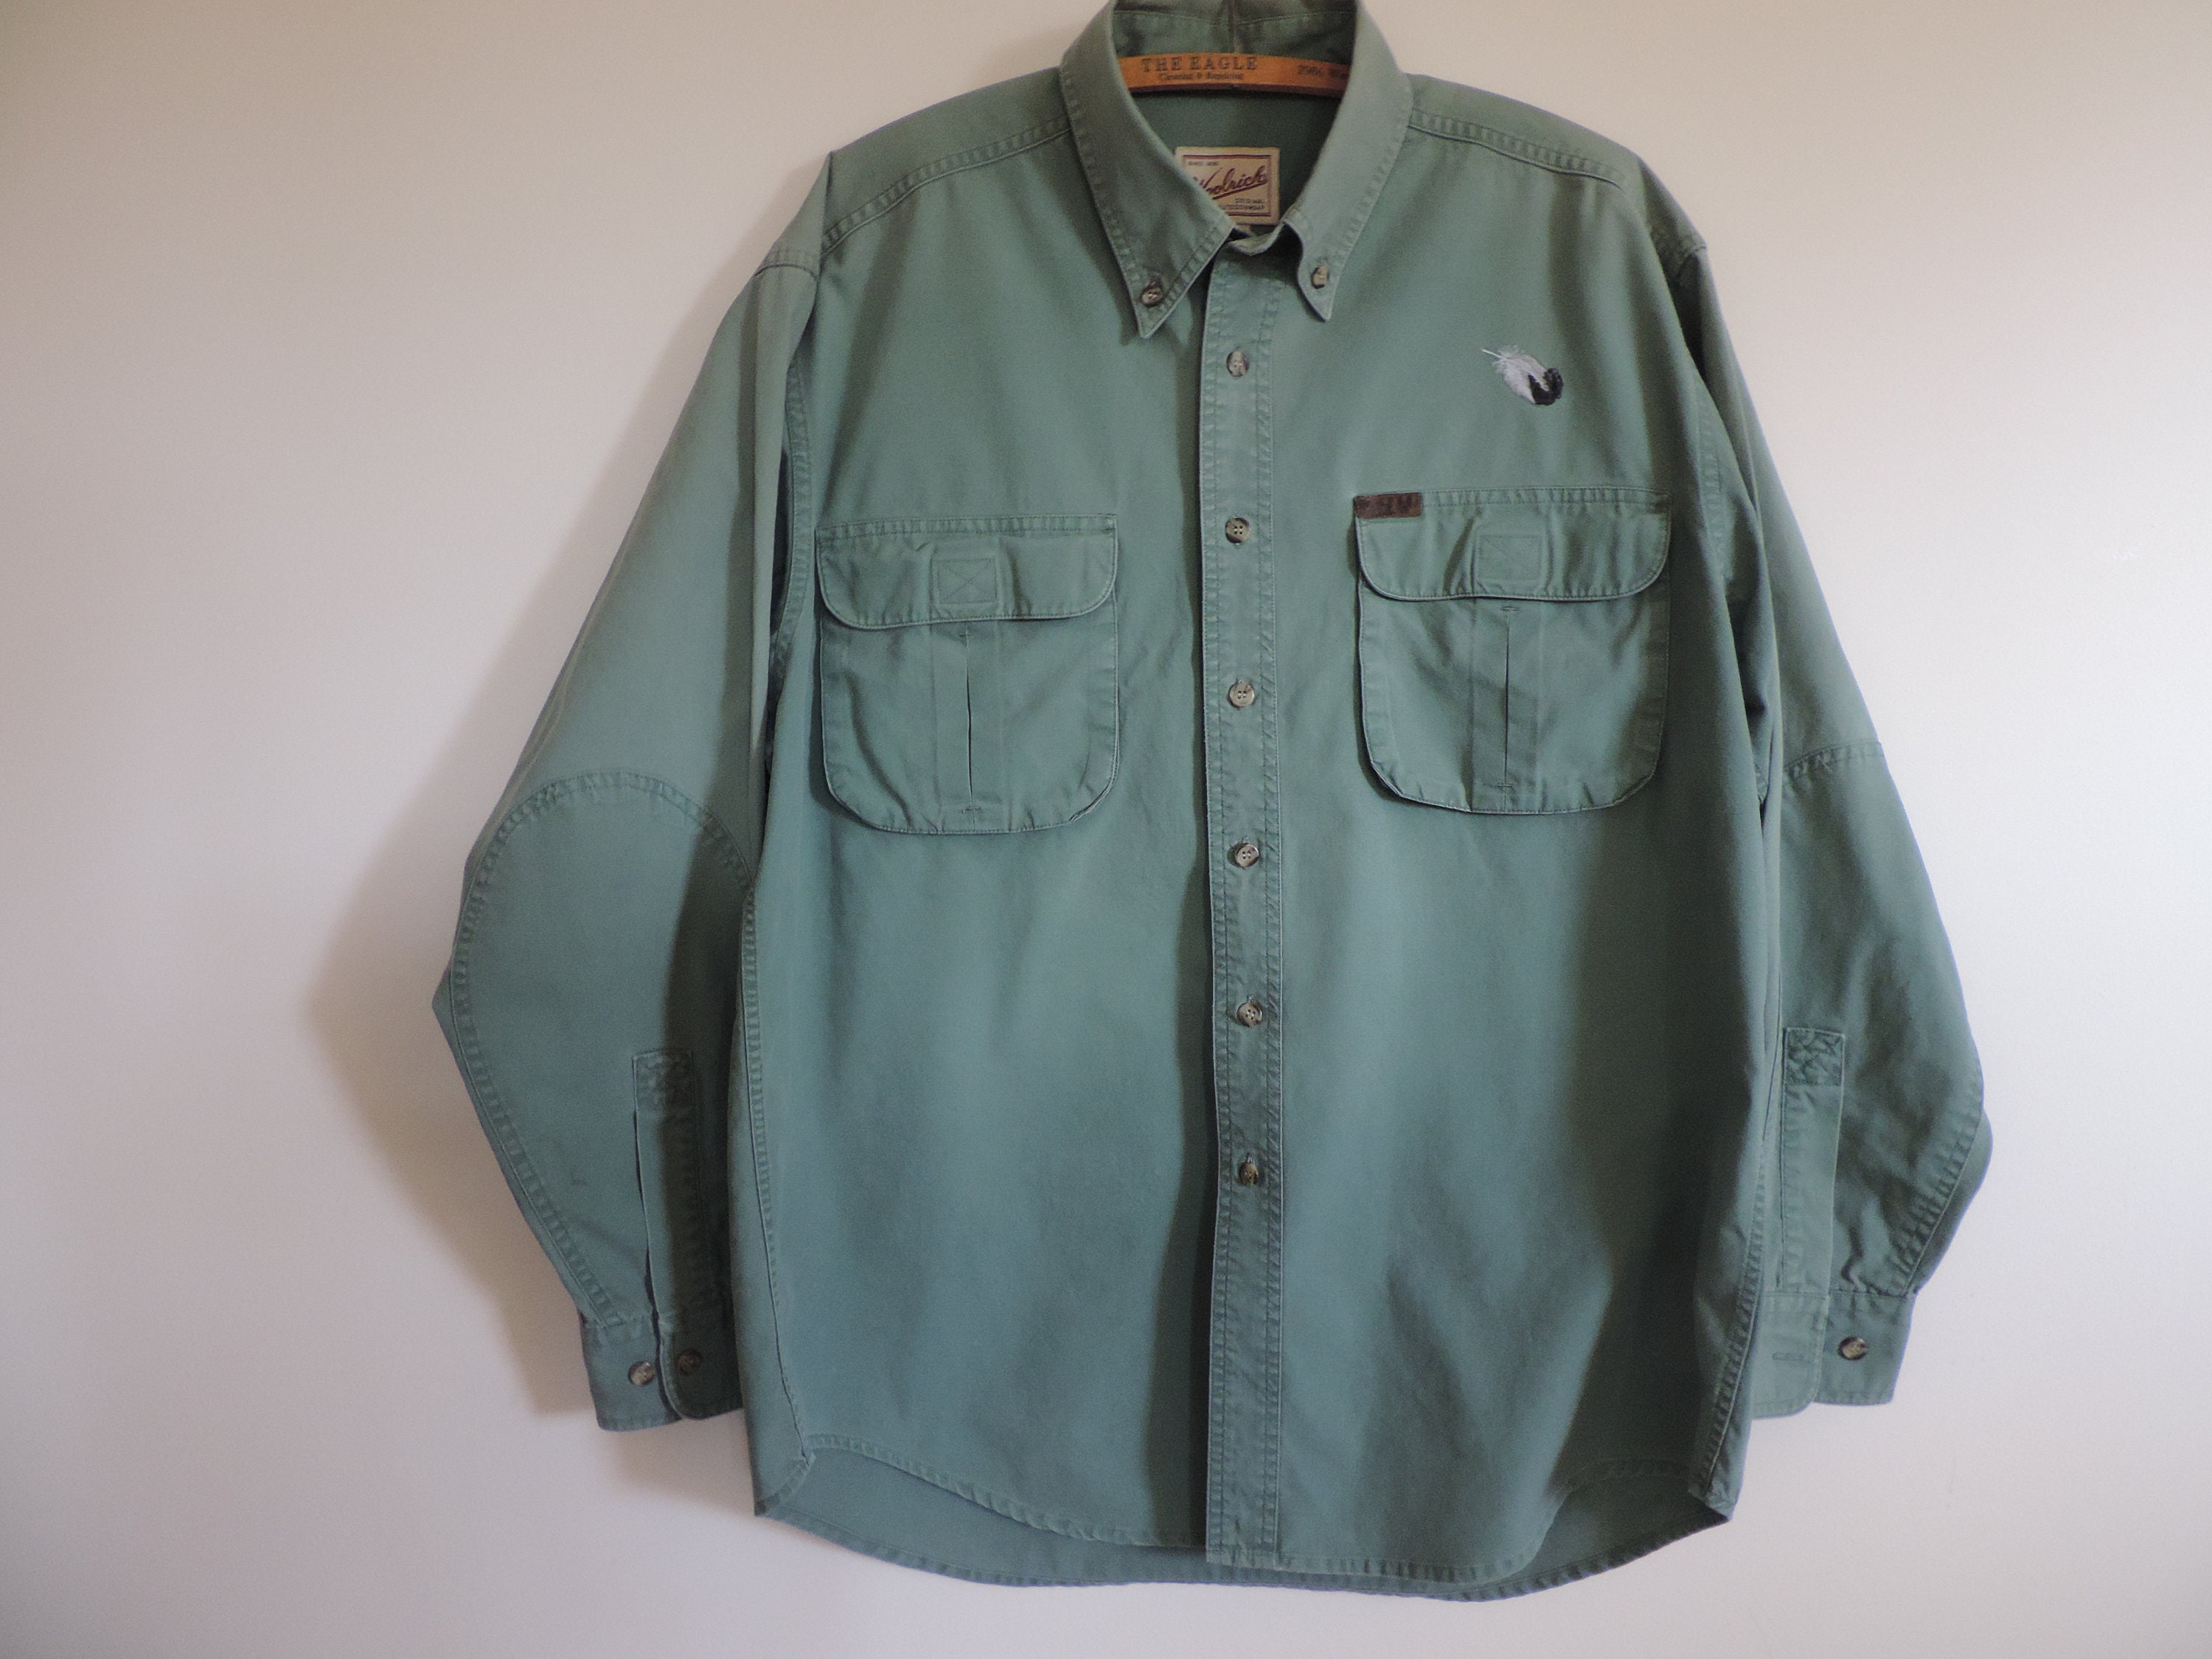 Vintage WOOLRICH Men's Shirt Fly Fishing Shirt 100% Cotton Button Down  Collar Long Sleeve Shirt Father's Day Gift 